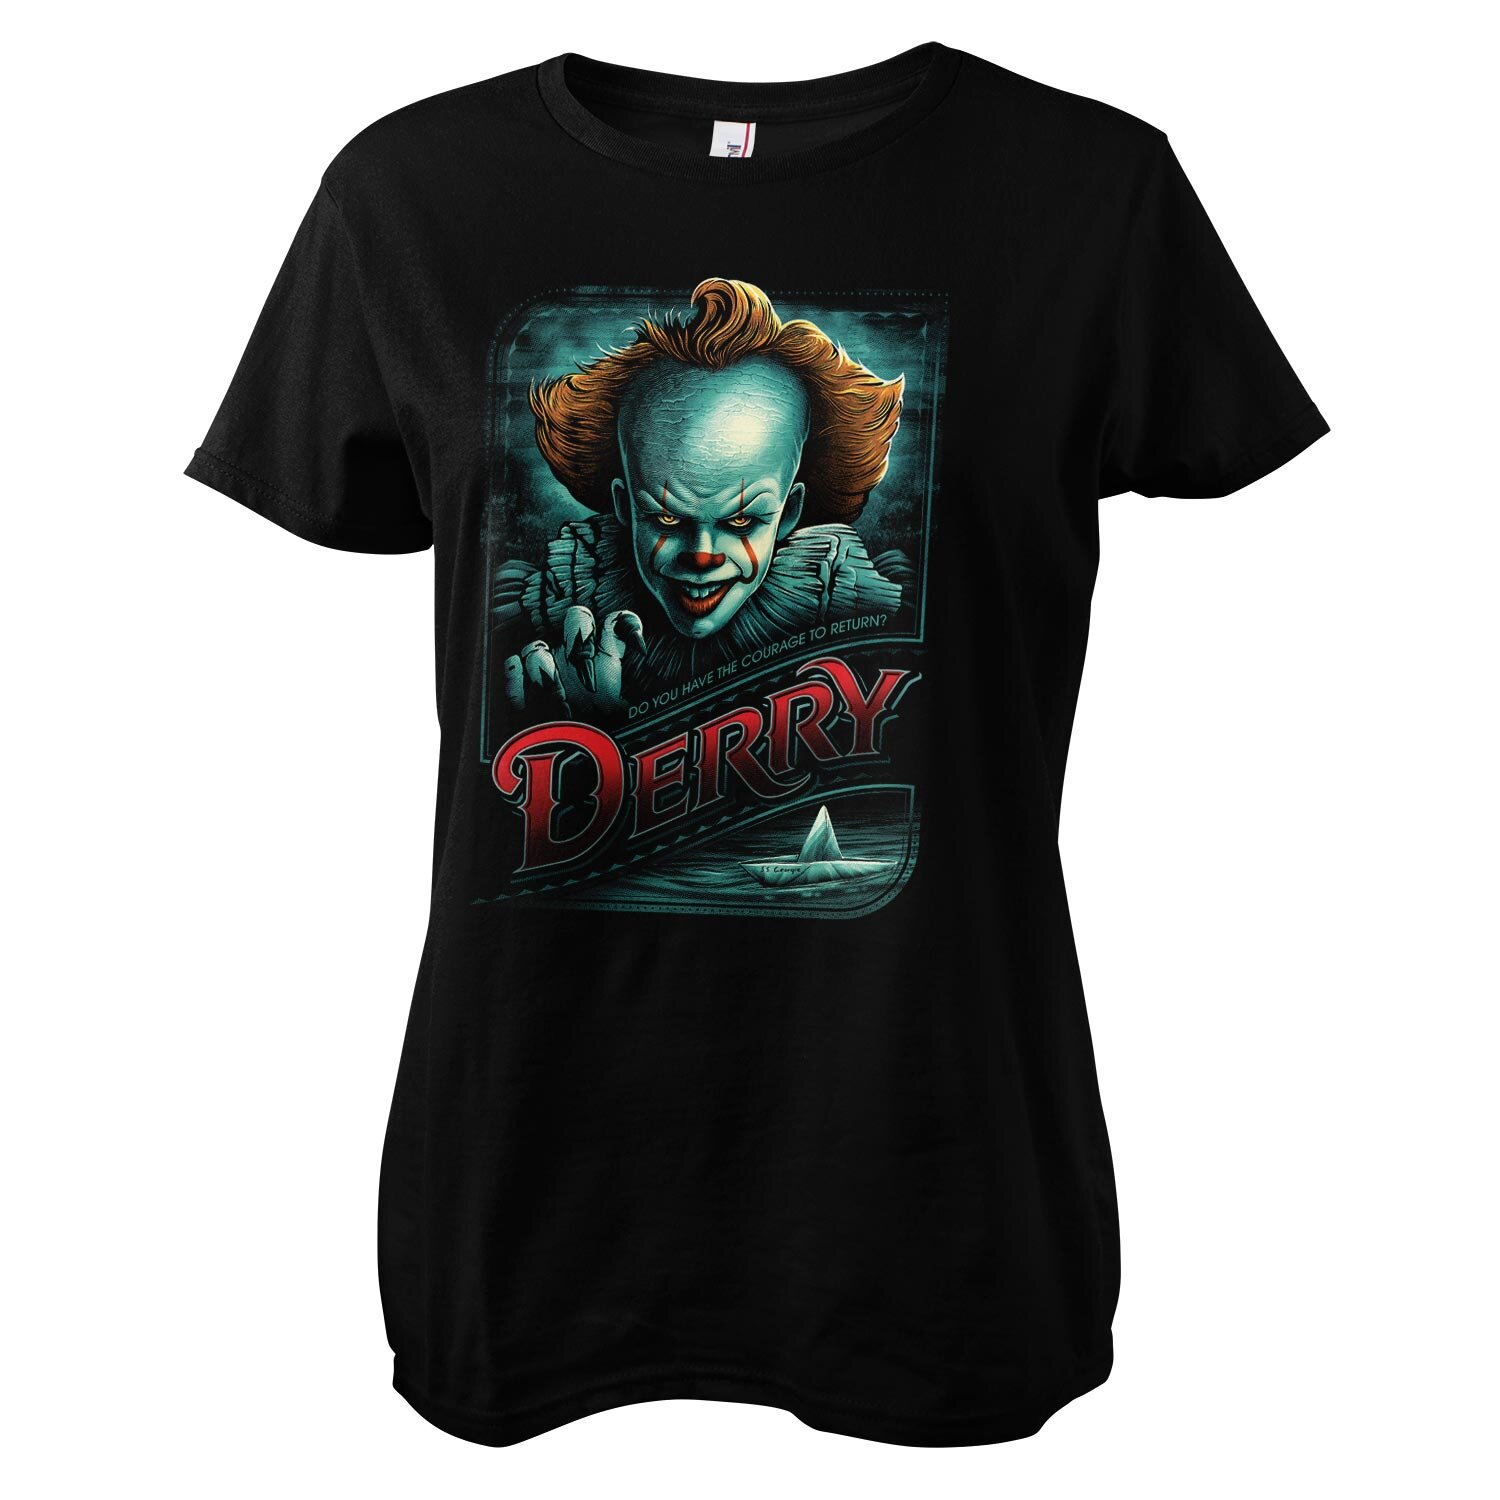 IT - Pennywise in Derry Girly Tee